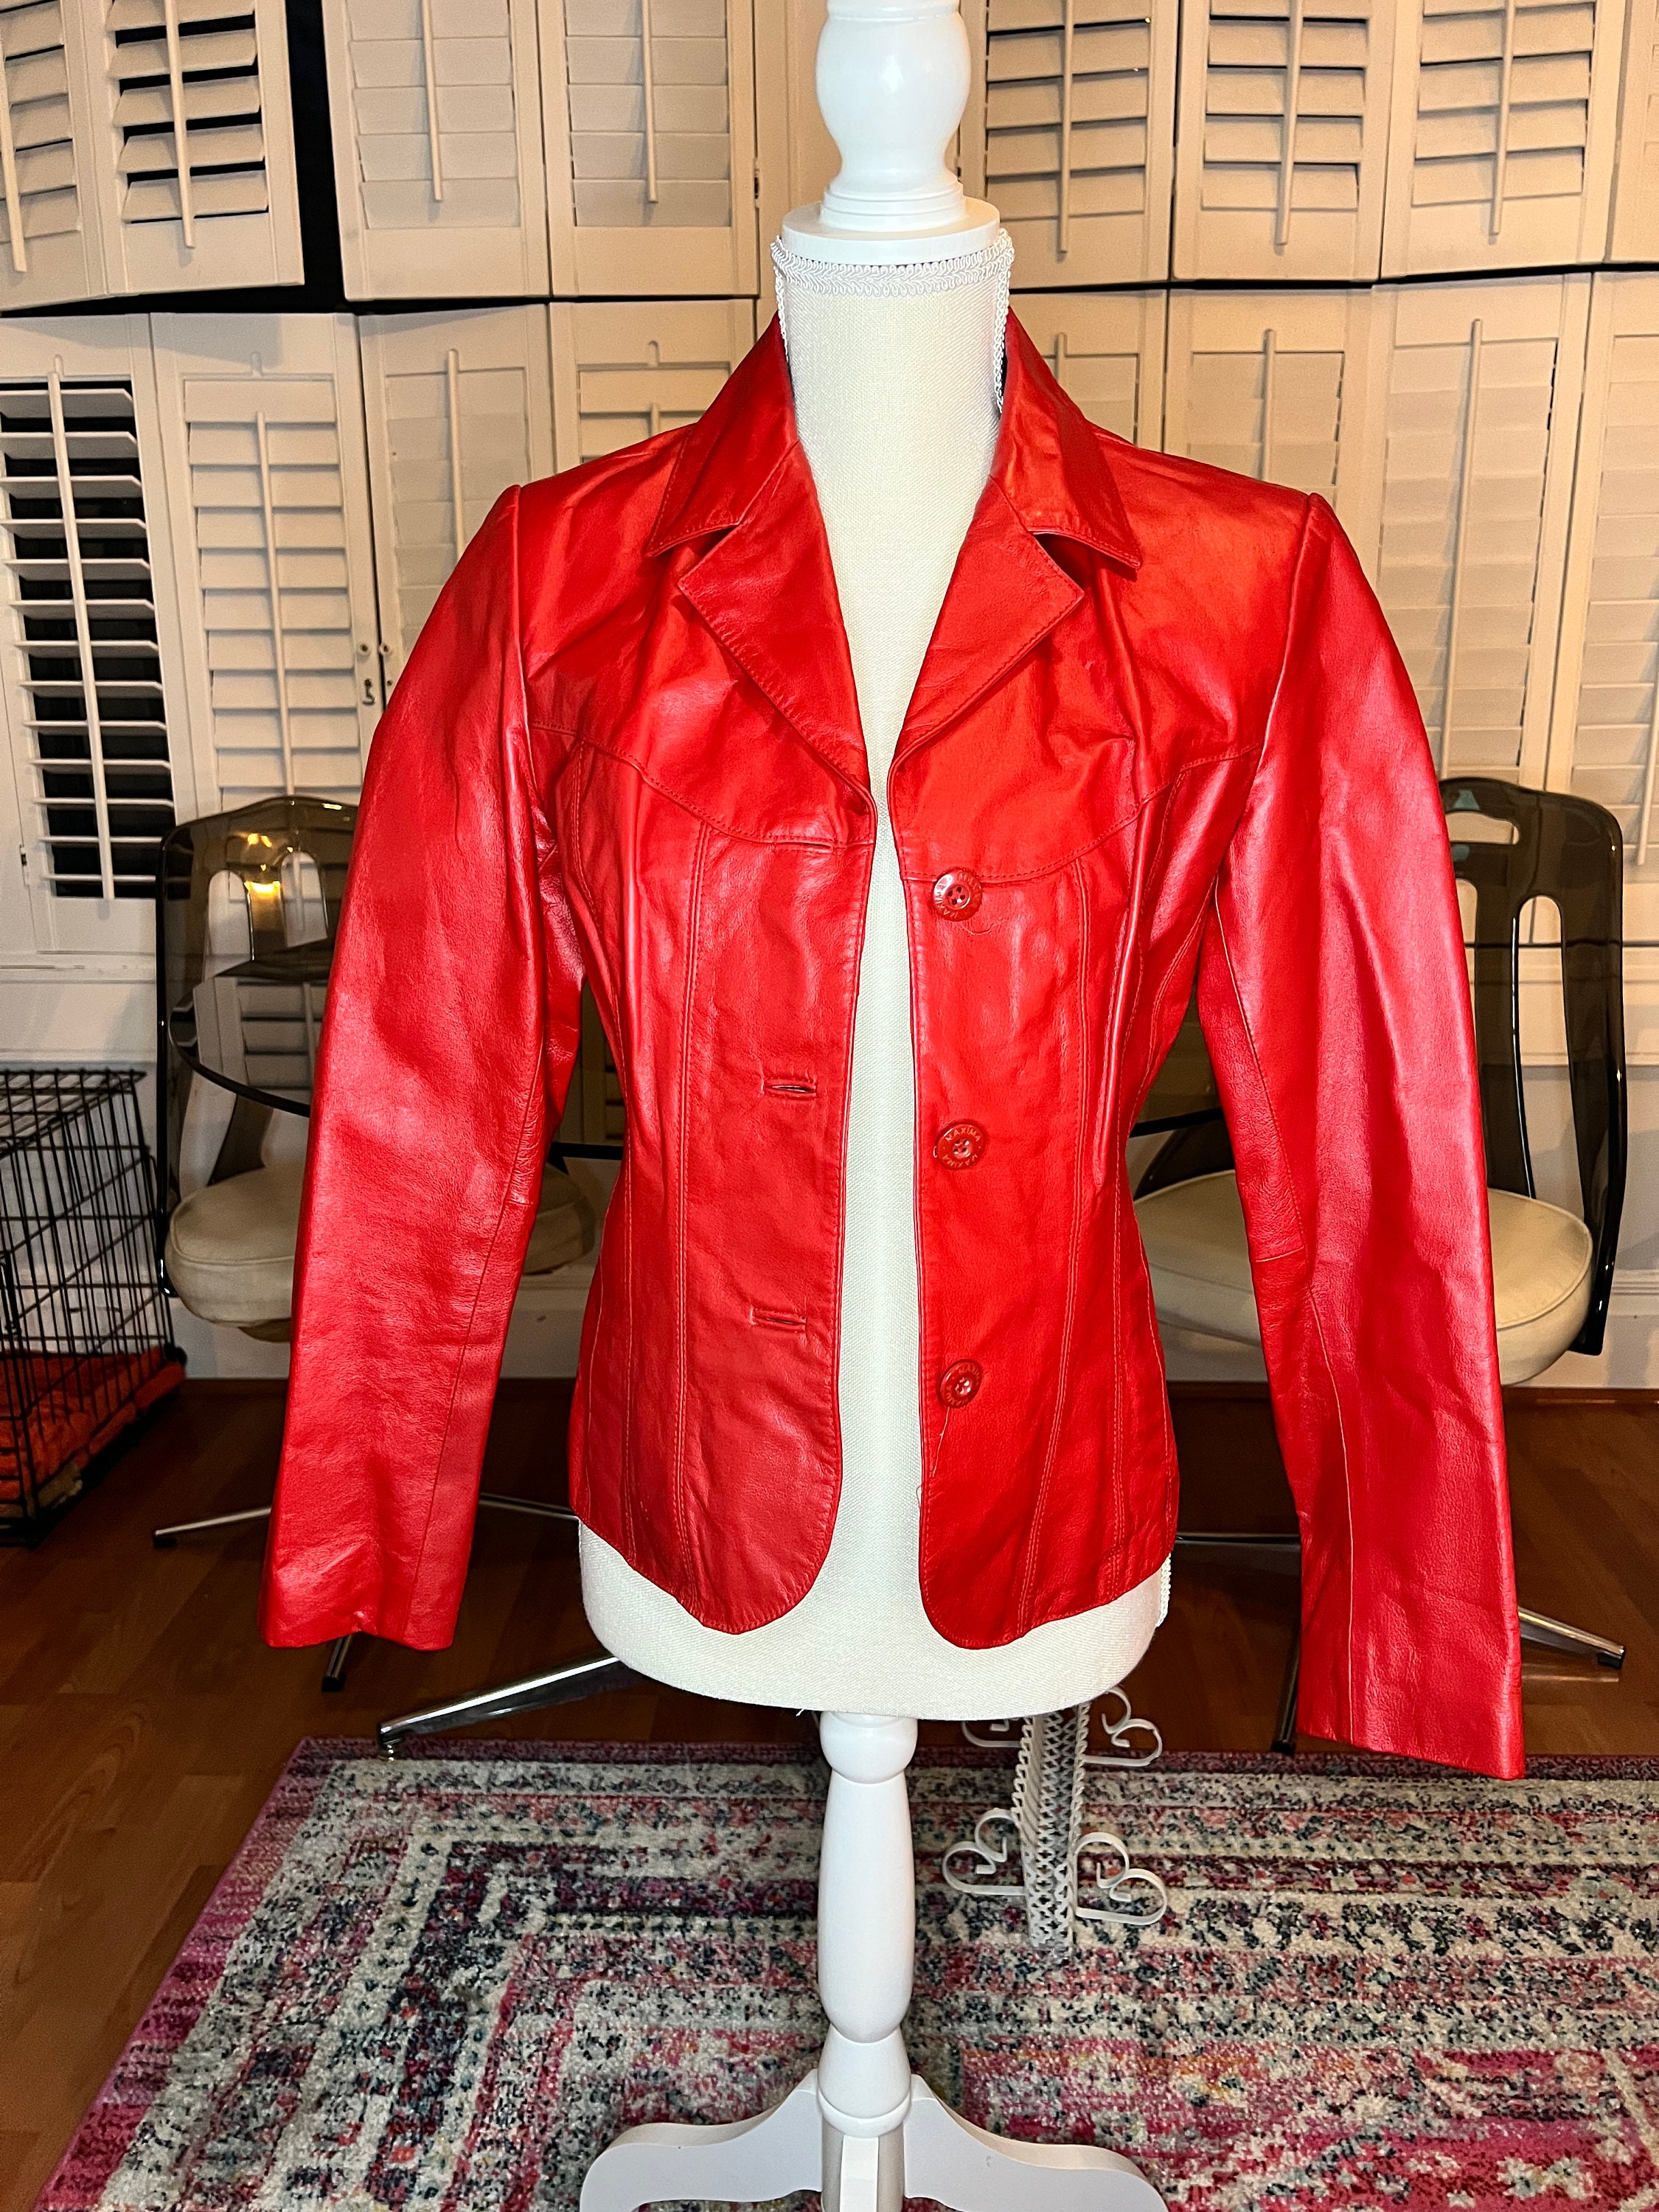 Jacket Red Etsy - Wilsons Leather